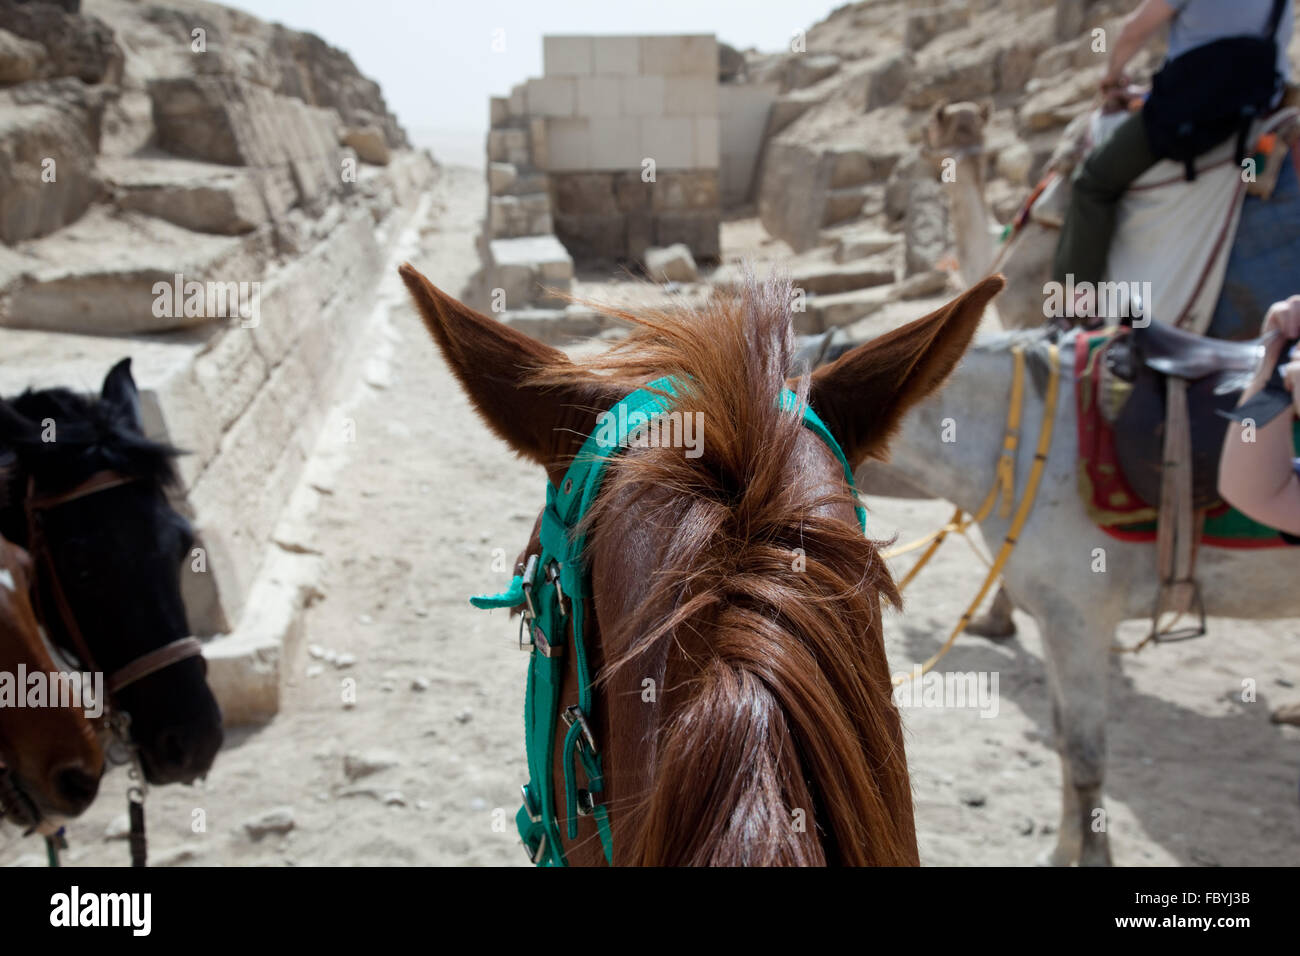 Camel and mule or horse for tourists by pyramids Stock Photo